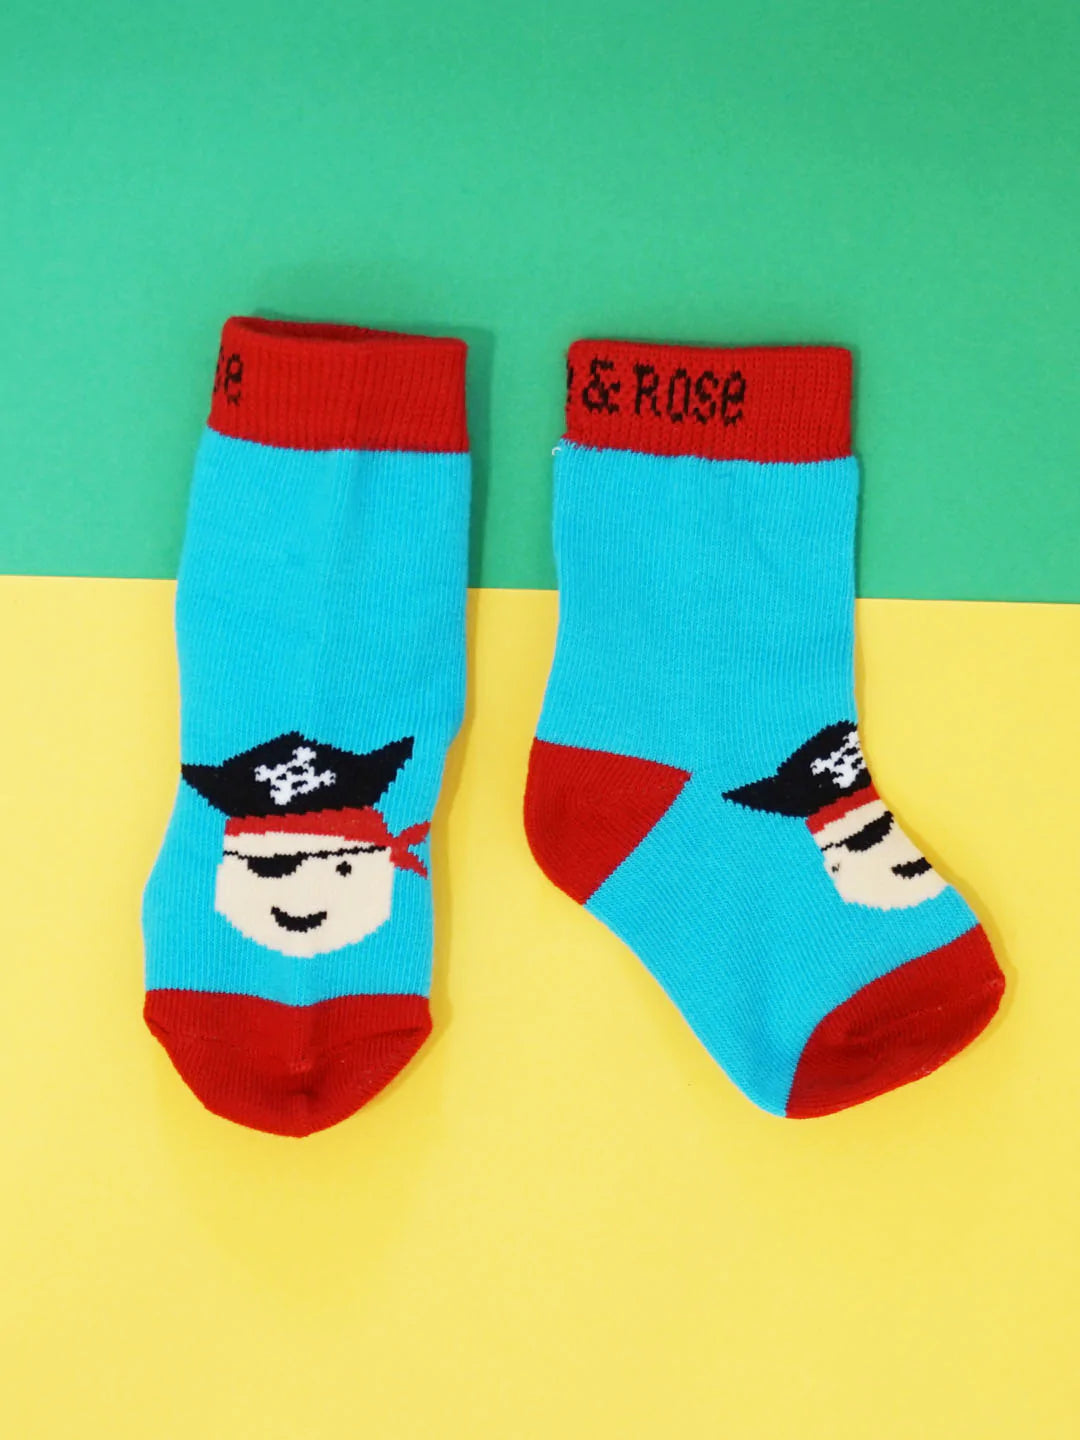 Percy the Pirate Socks by Blade and Rose